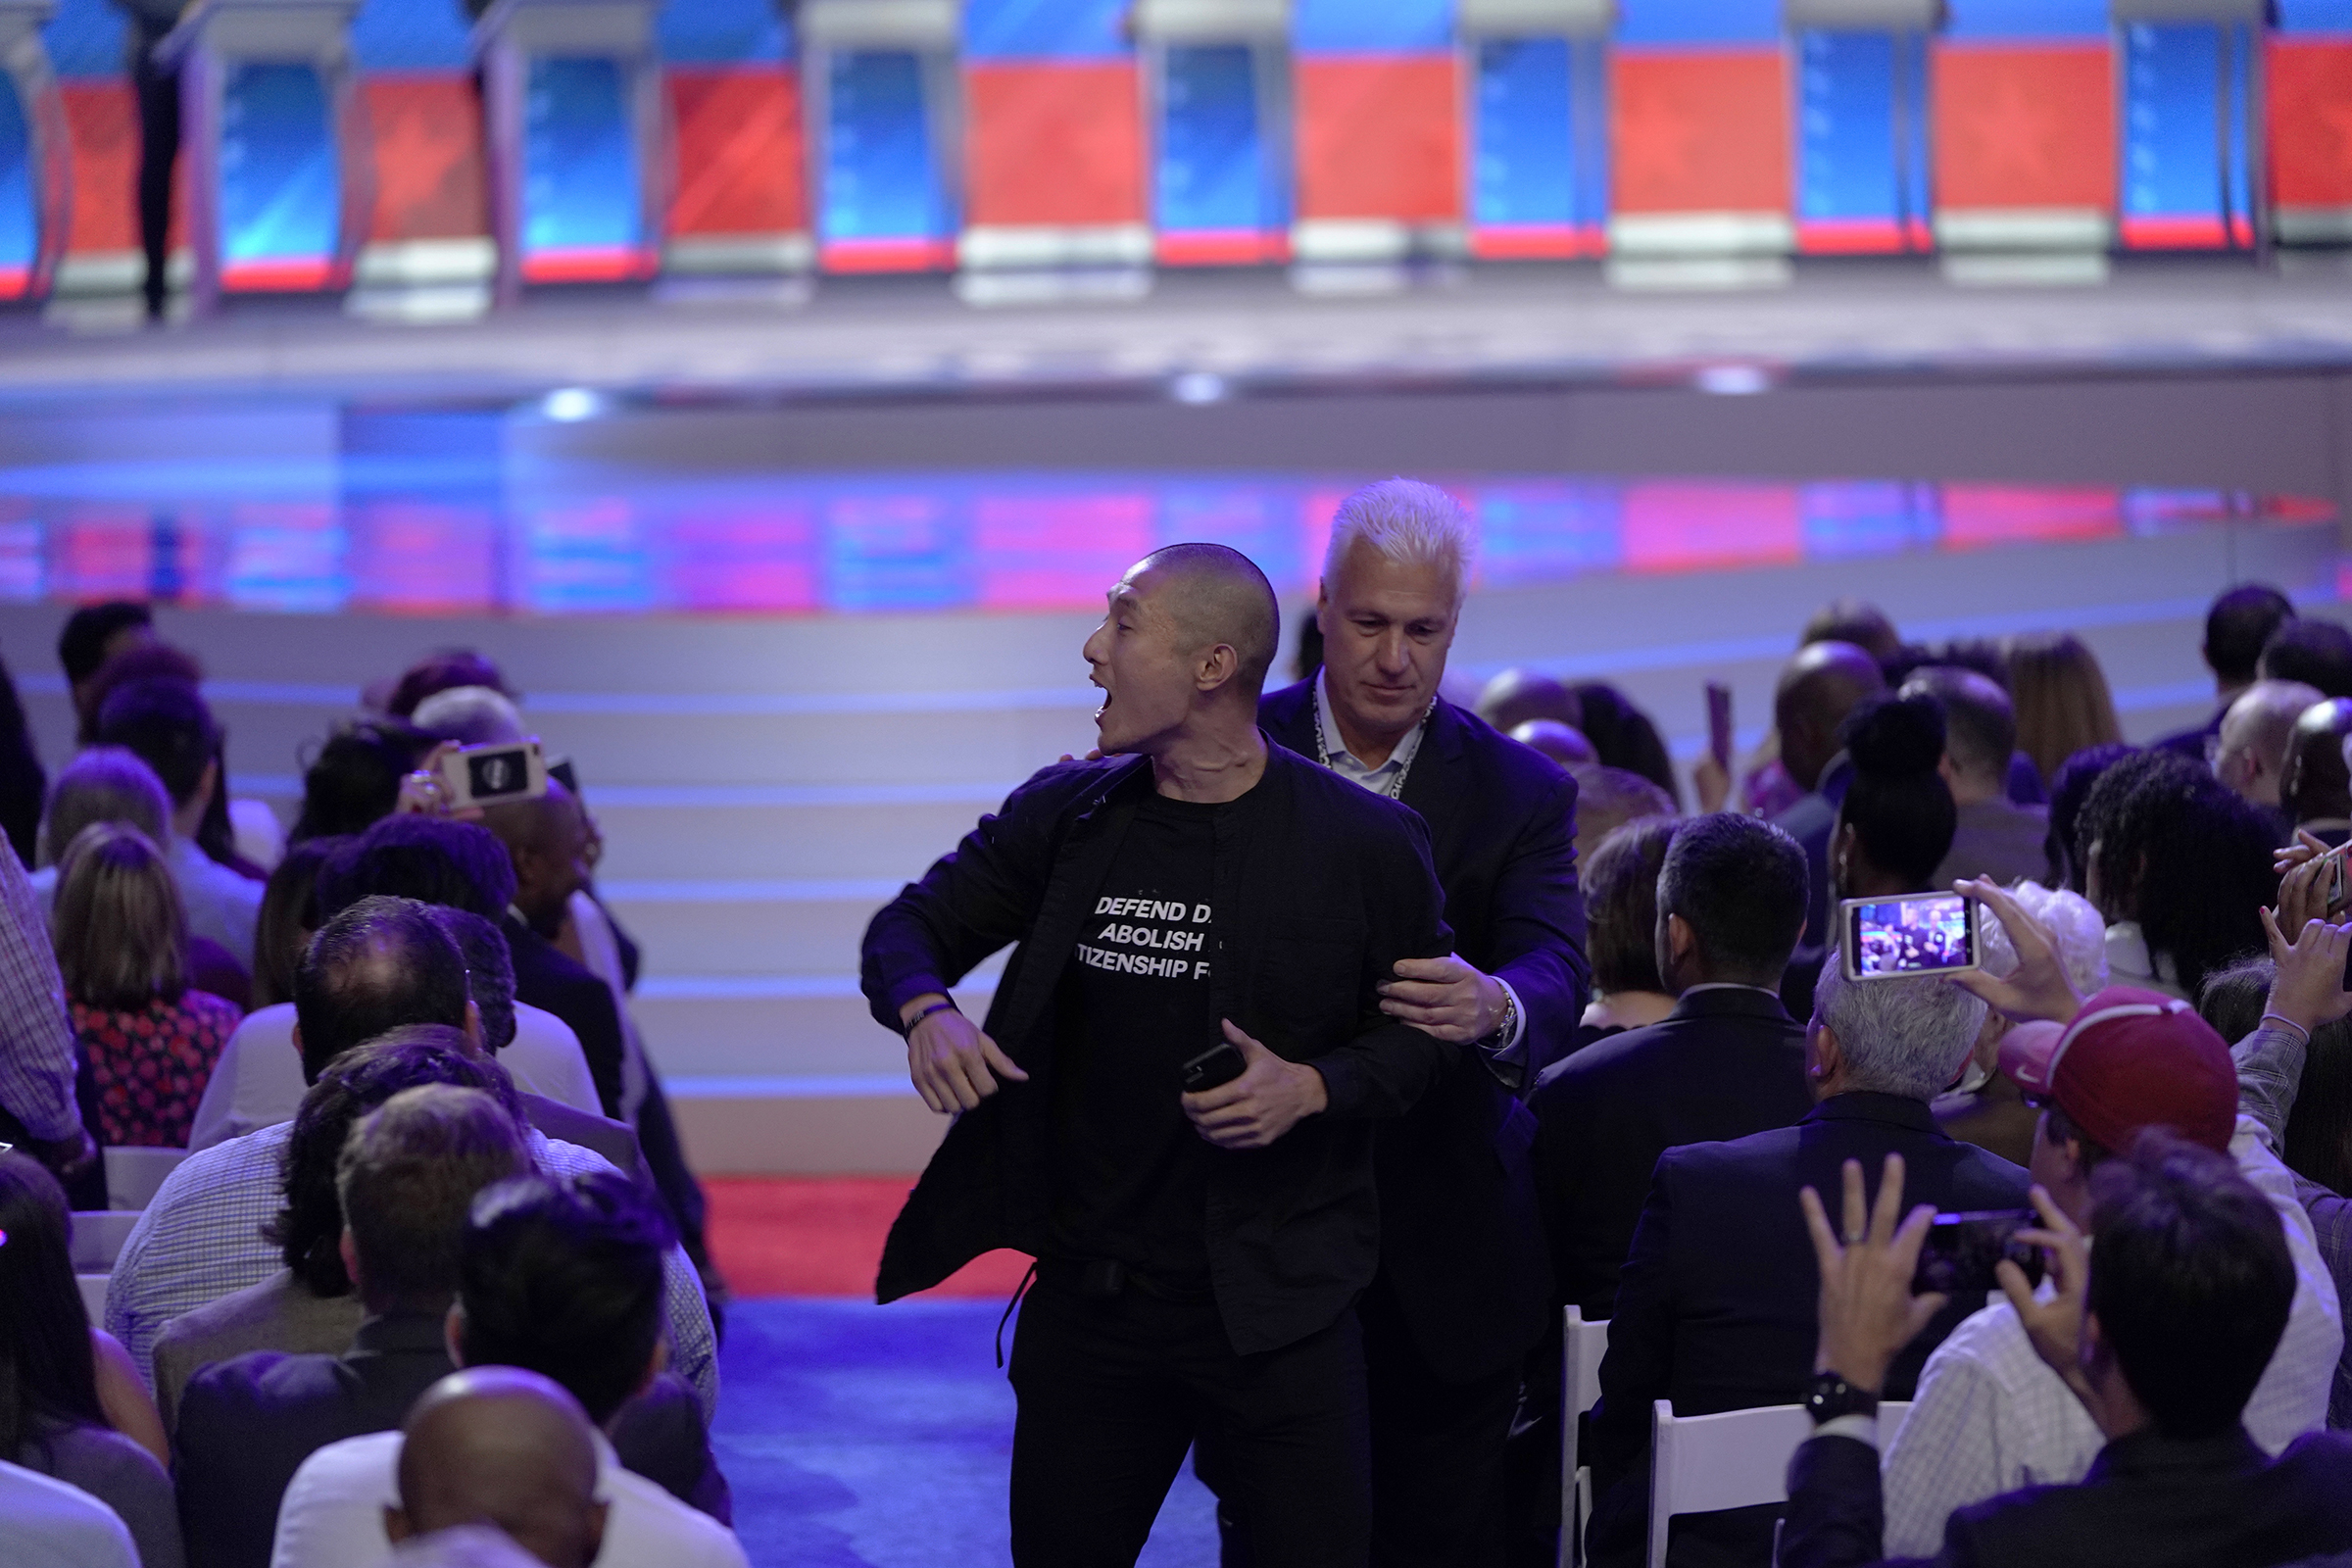 A protester is removed Sept. 12, 2019, after interrupting a Democratic presidential primary debate hosted by ABC at Texas Southern University in Houston. (David J. Phillip—AP)